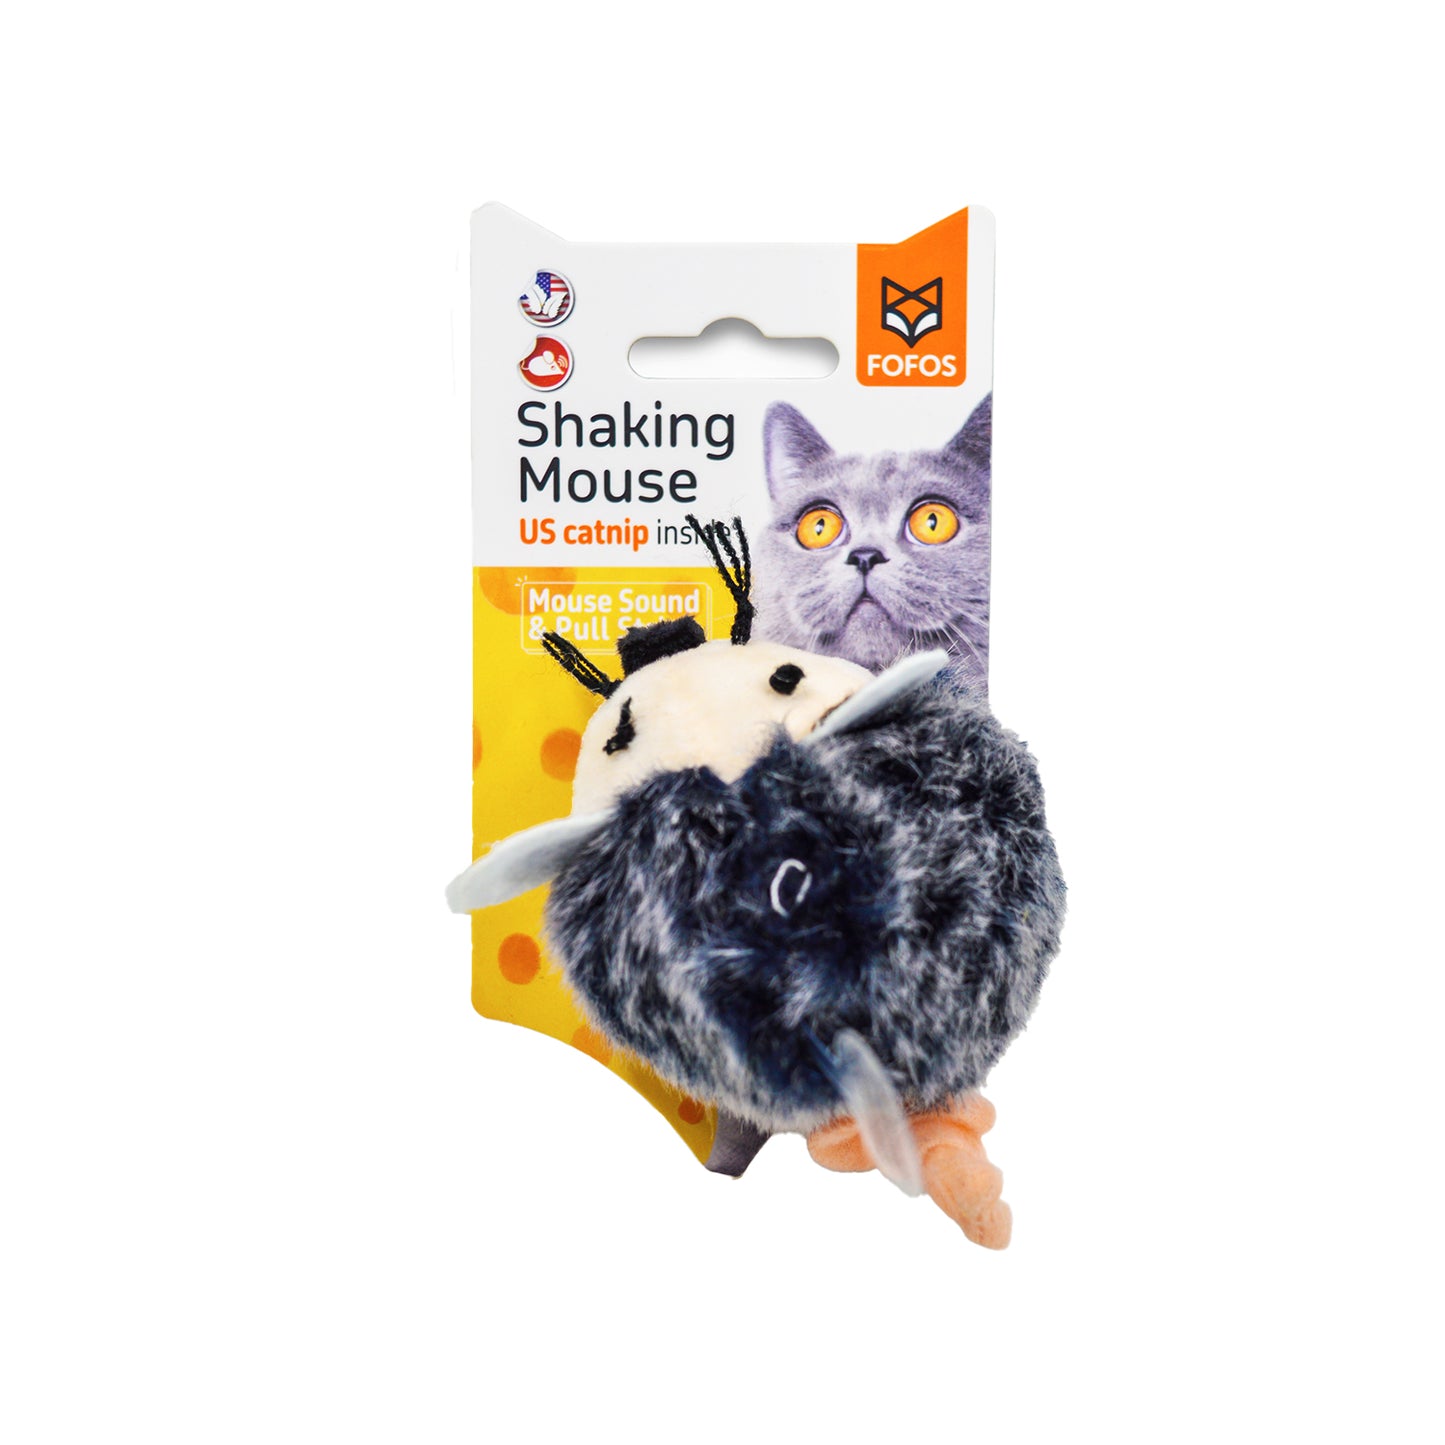 Fofos - Pull String and Sound chip Mouse-Electronic Mouse Toy